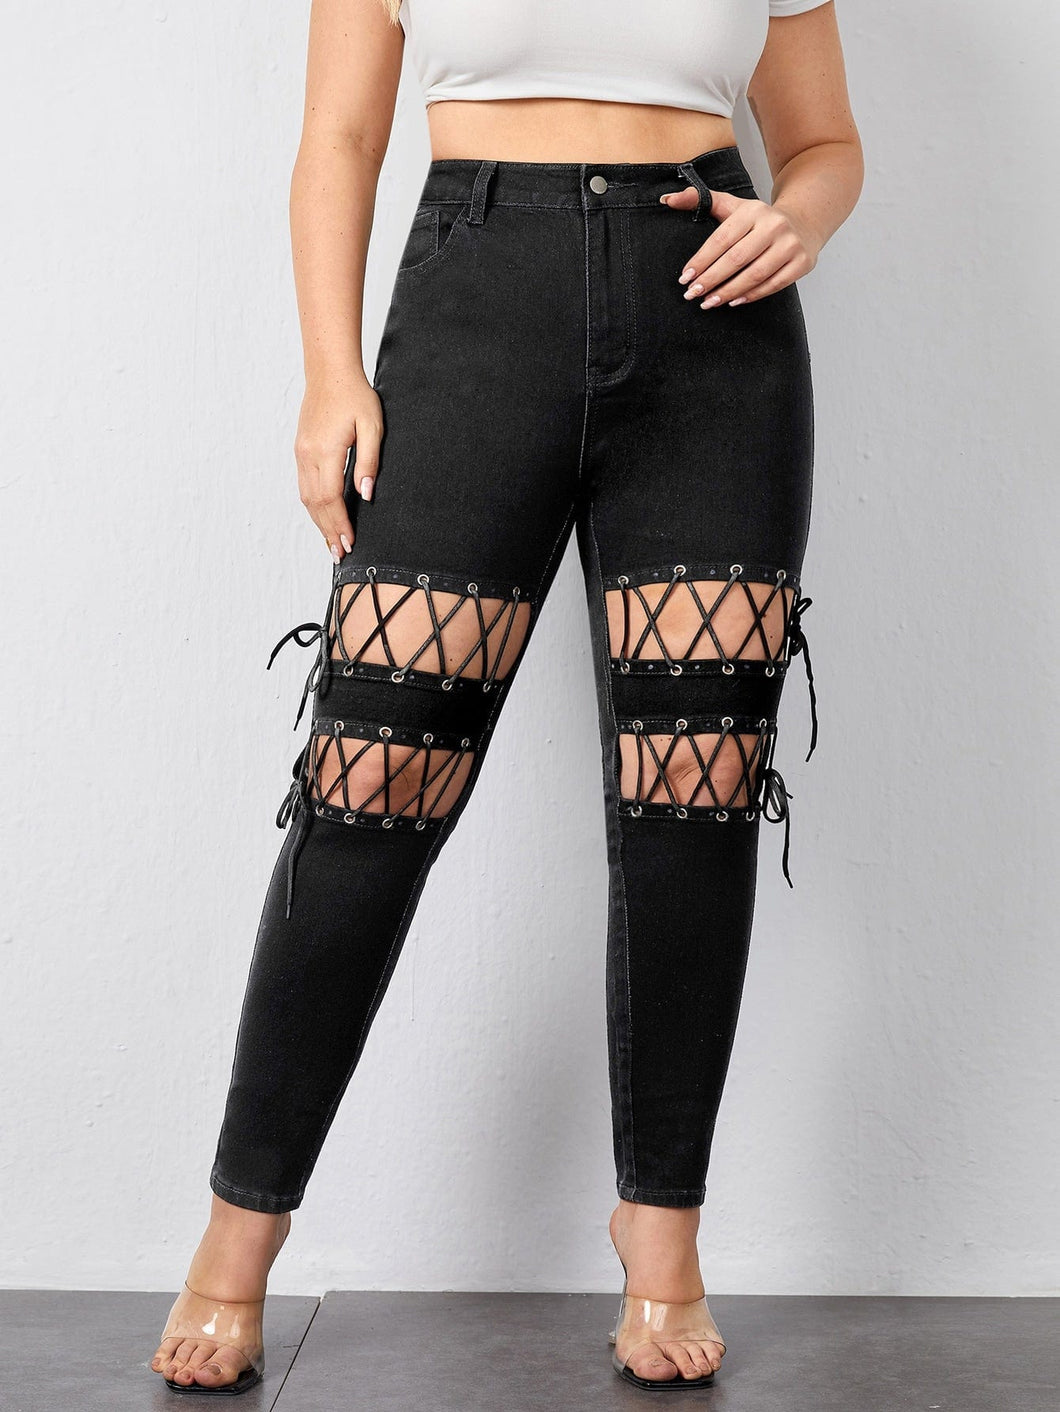 Love God. Store Plus Size Jeans Plus High Waist Eyelet Lace Up Knot Cut out Skinny Jeans price